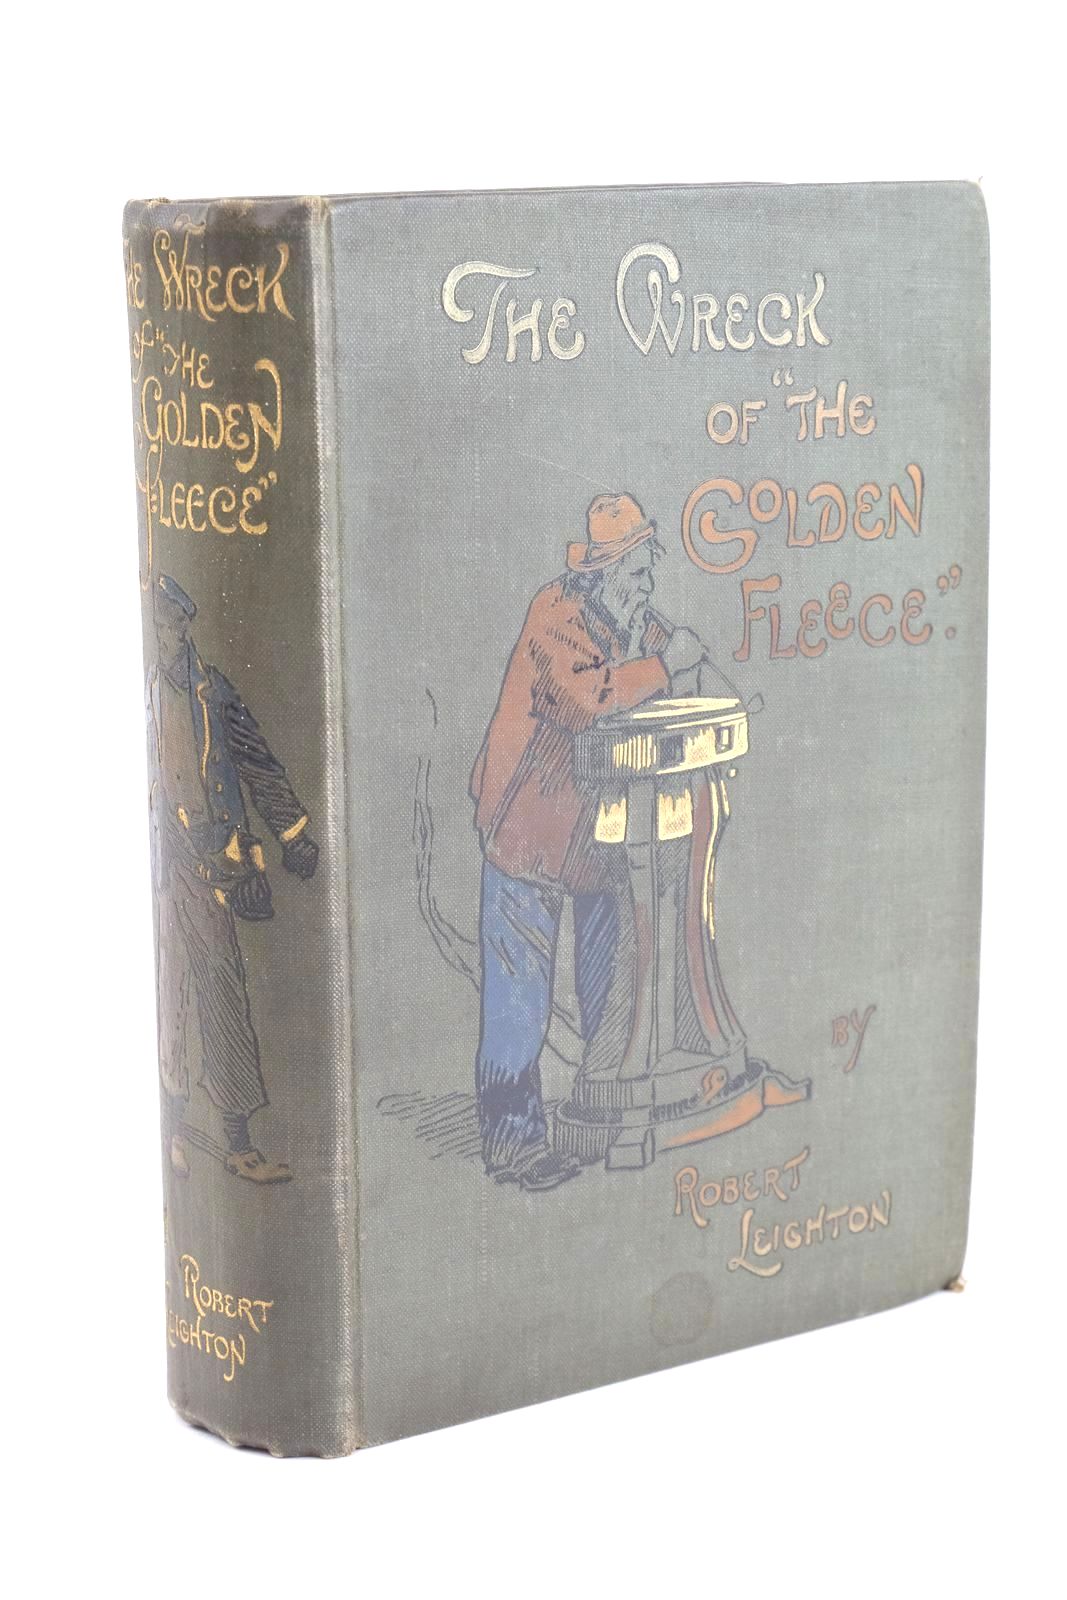 Photo of WRECK OF THE GOLDEN FLEECE written by Leighton, Robert illustrated by Brangwyn, Frank published by Blackie & Son Ltd. (STOCK CODE: 1324695)  for sale by Stella & Rose's Books